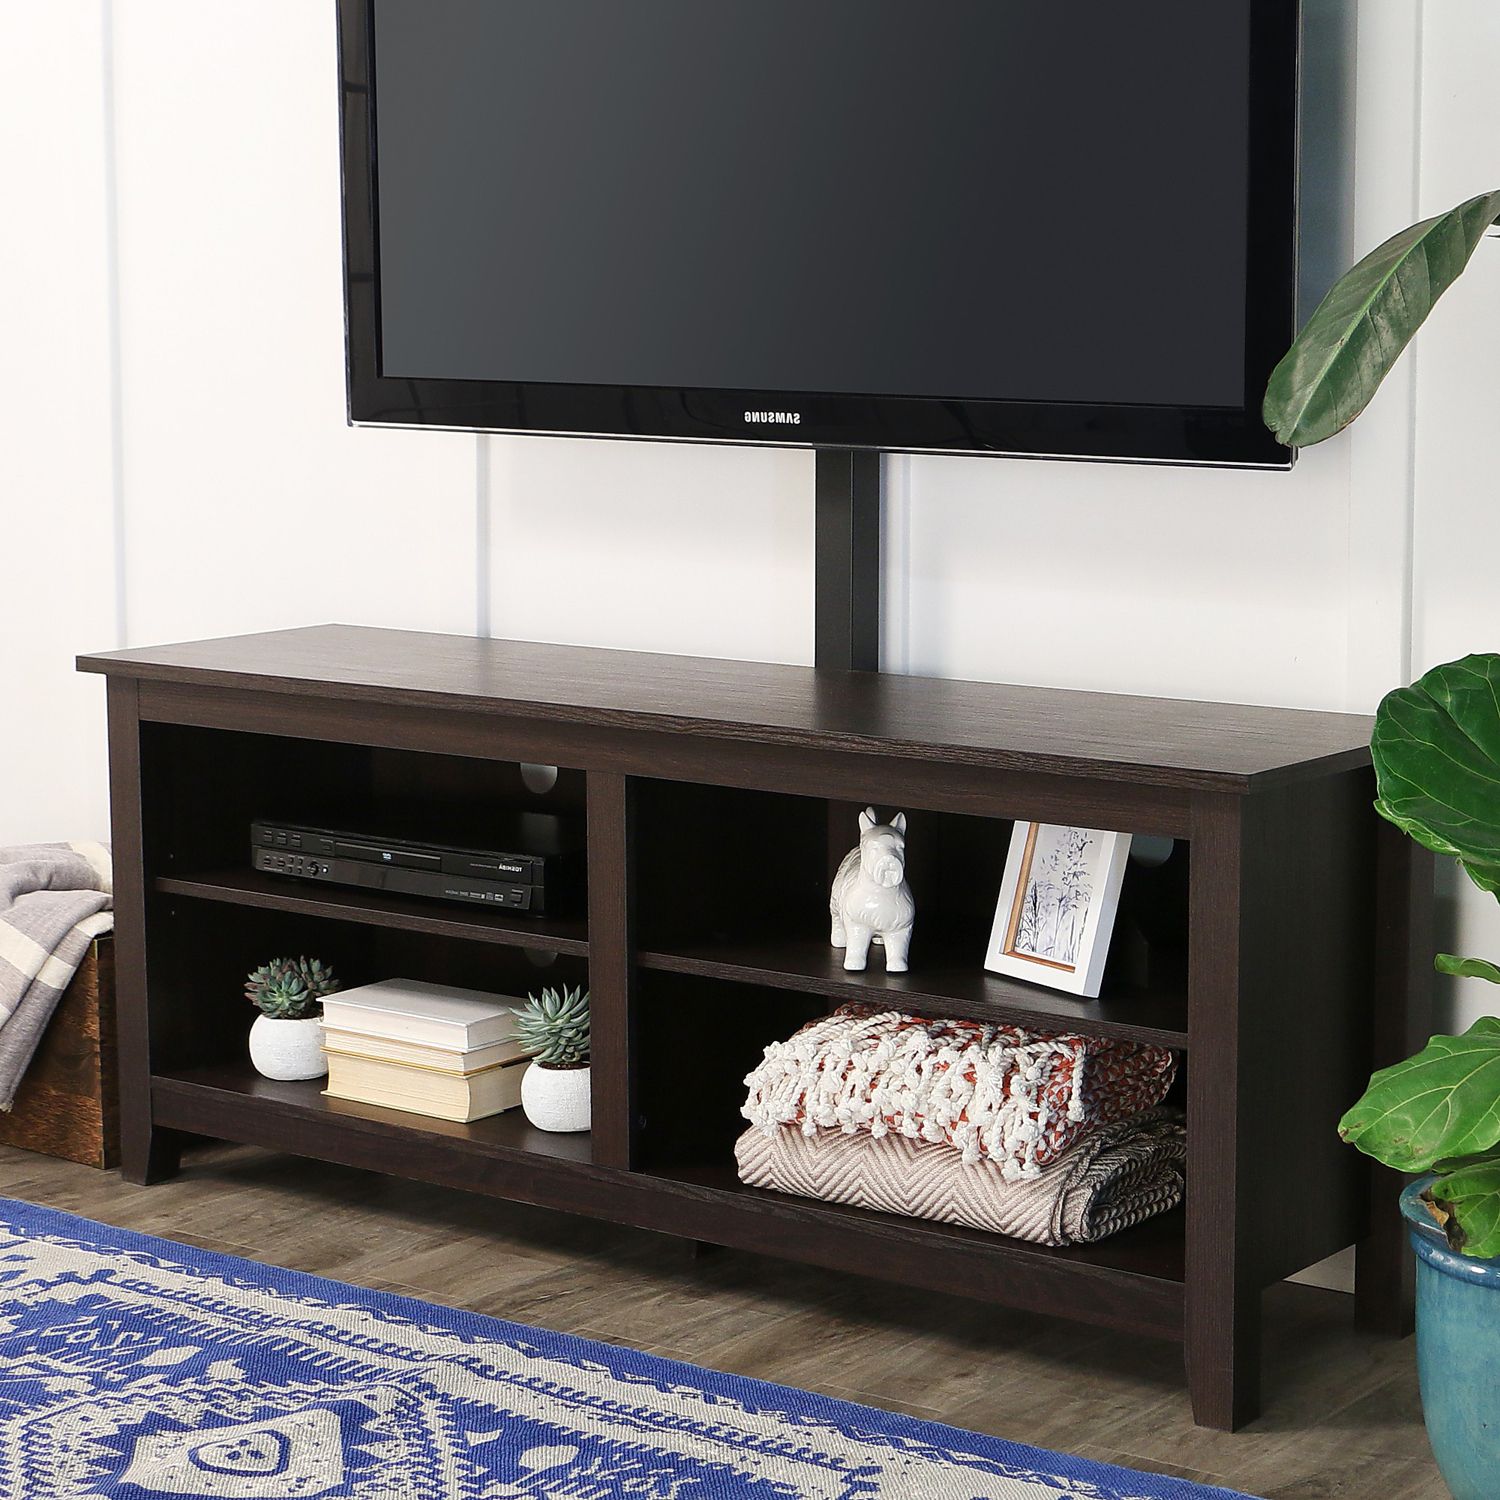 58" Espresso Tv Stand Console With Mount – Pier1 Imports For Farmhouse Tv Stands For 75" Flat Screen With Console Table Storage Cabinet (View 6 of 20)